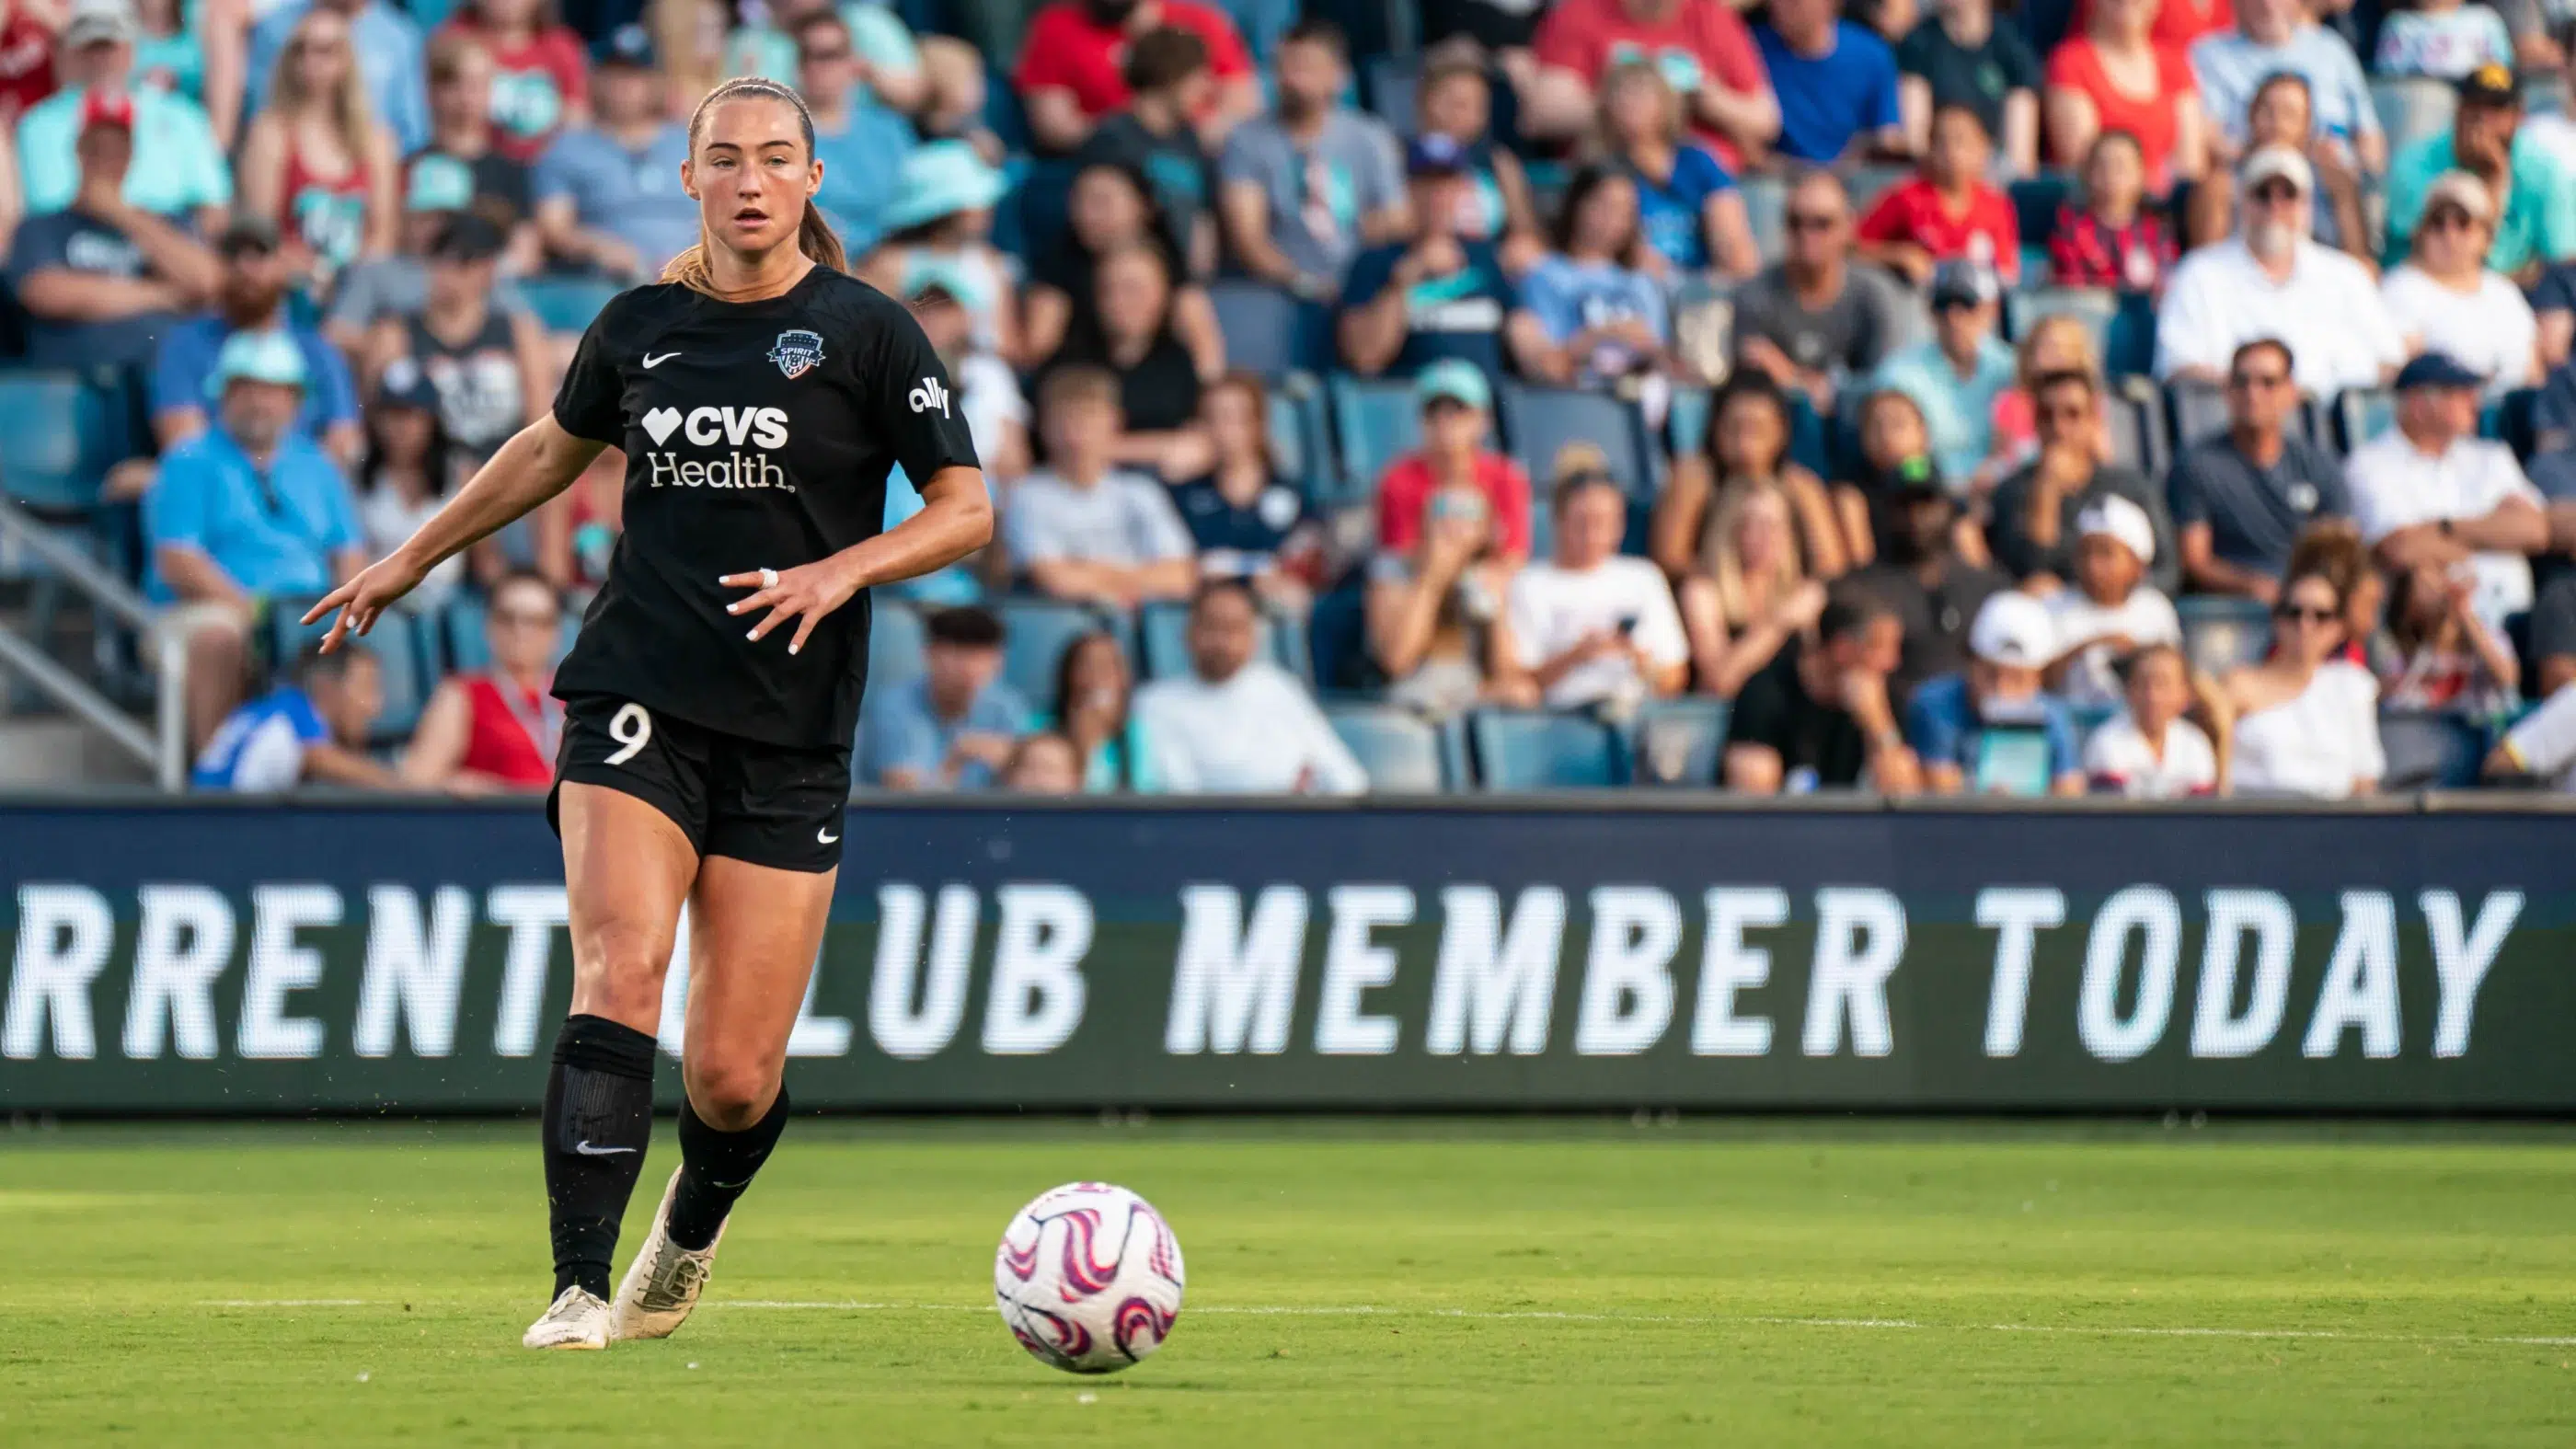 Preview: Washington Spirit clashes with Portland Thorns FC in Highly Anticipated Friday Night Match Featured Image